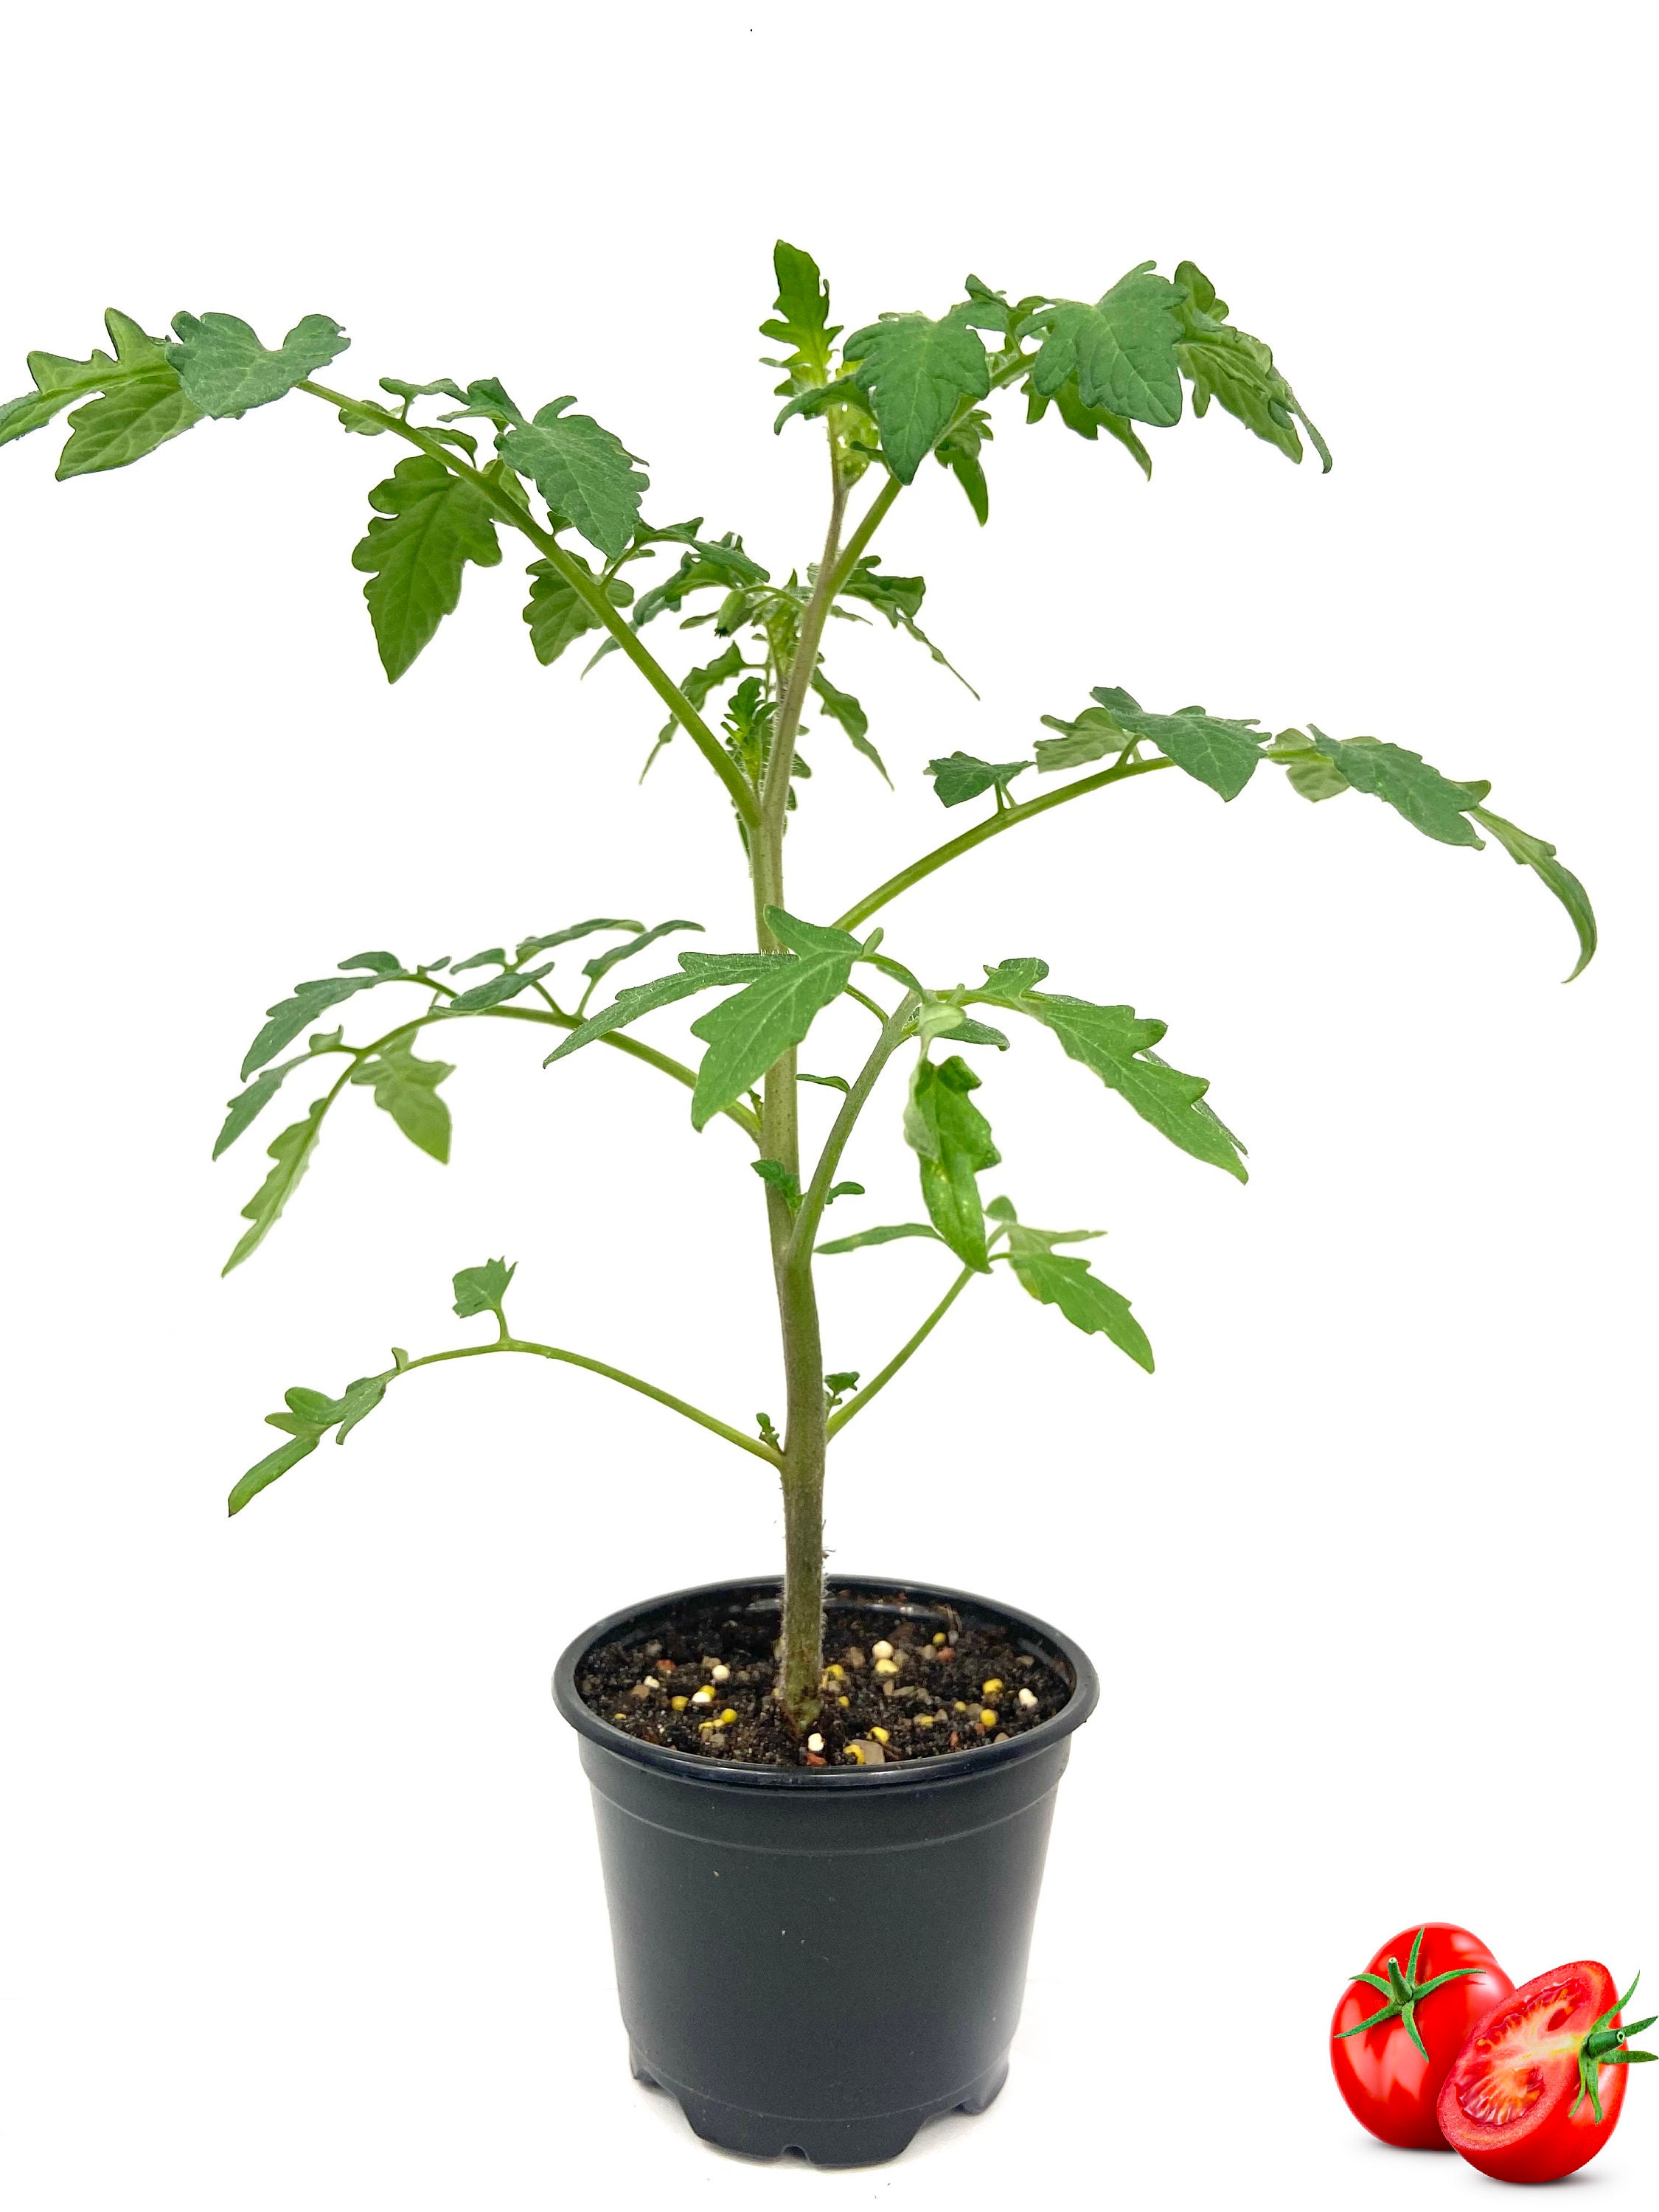 Patio Tomato Plant Live in a 4 Inch Pot Growers - Etsy